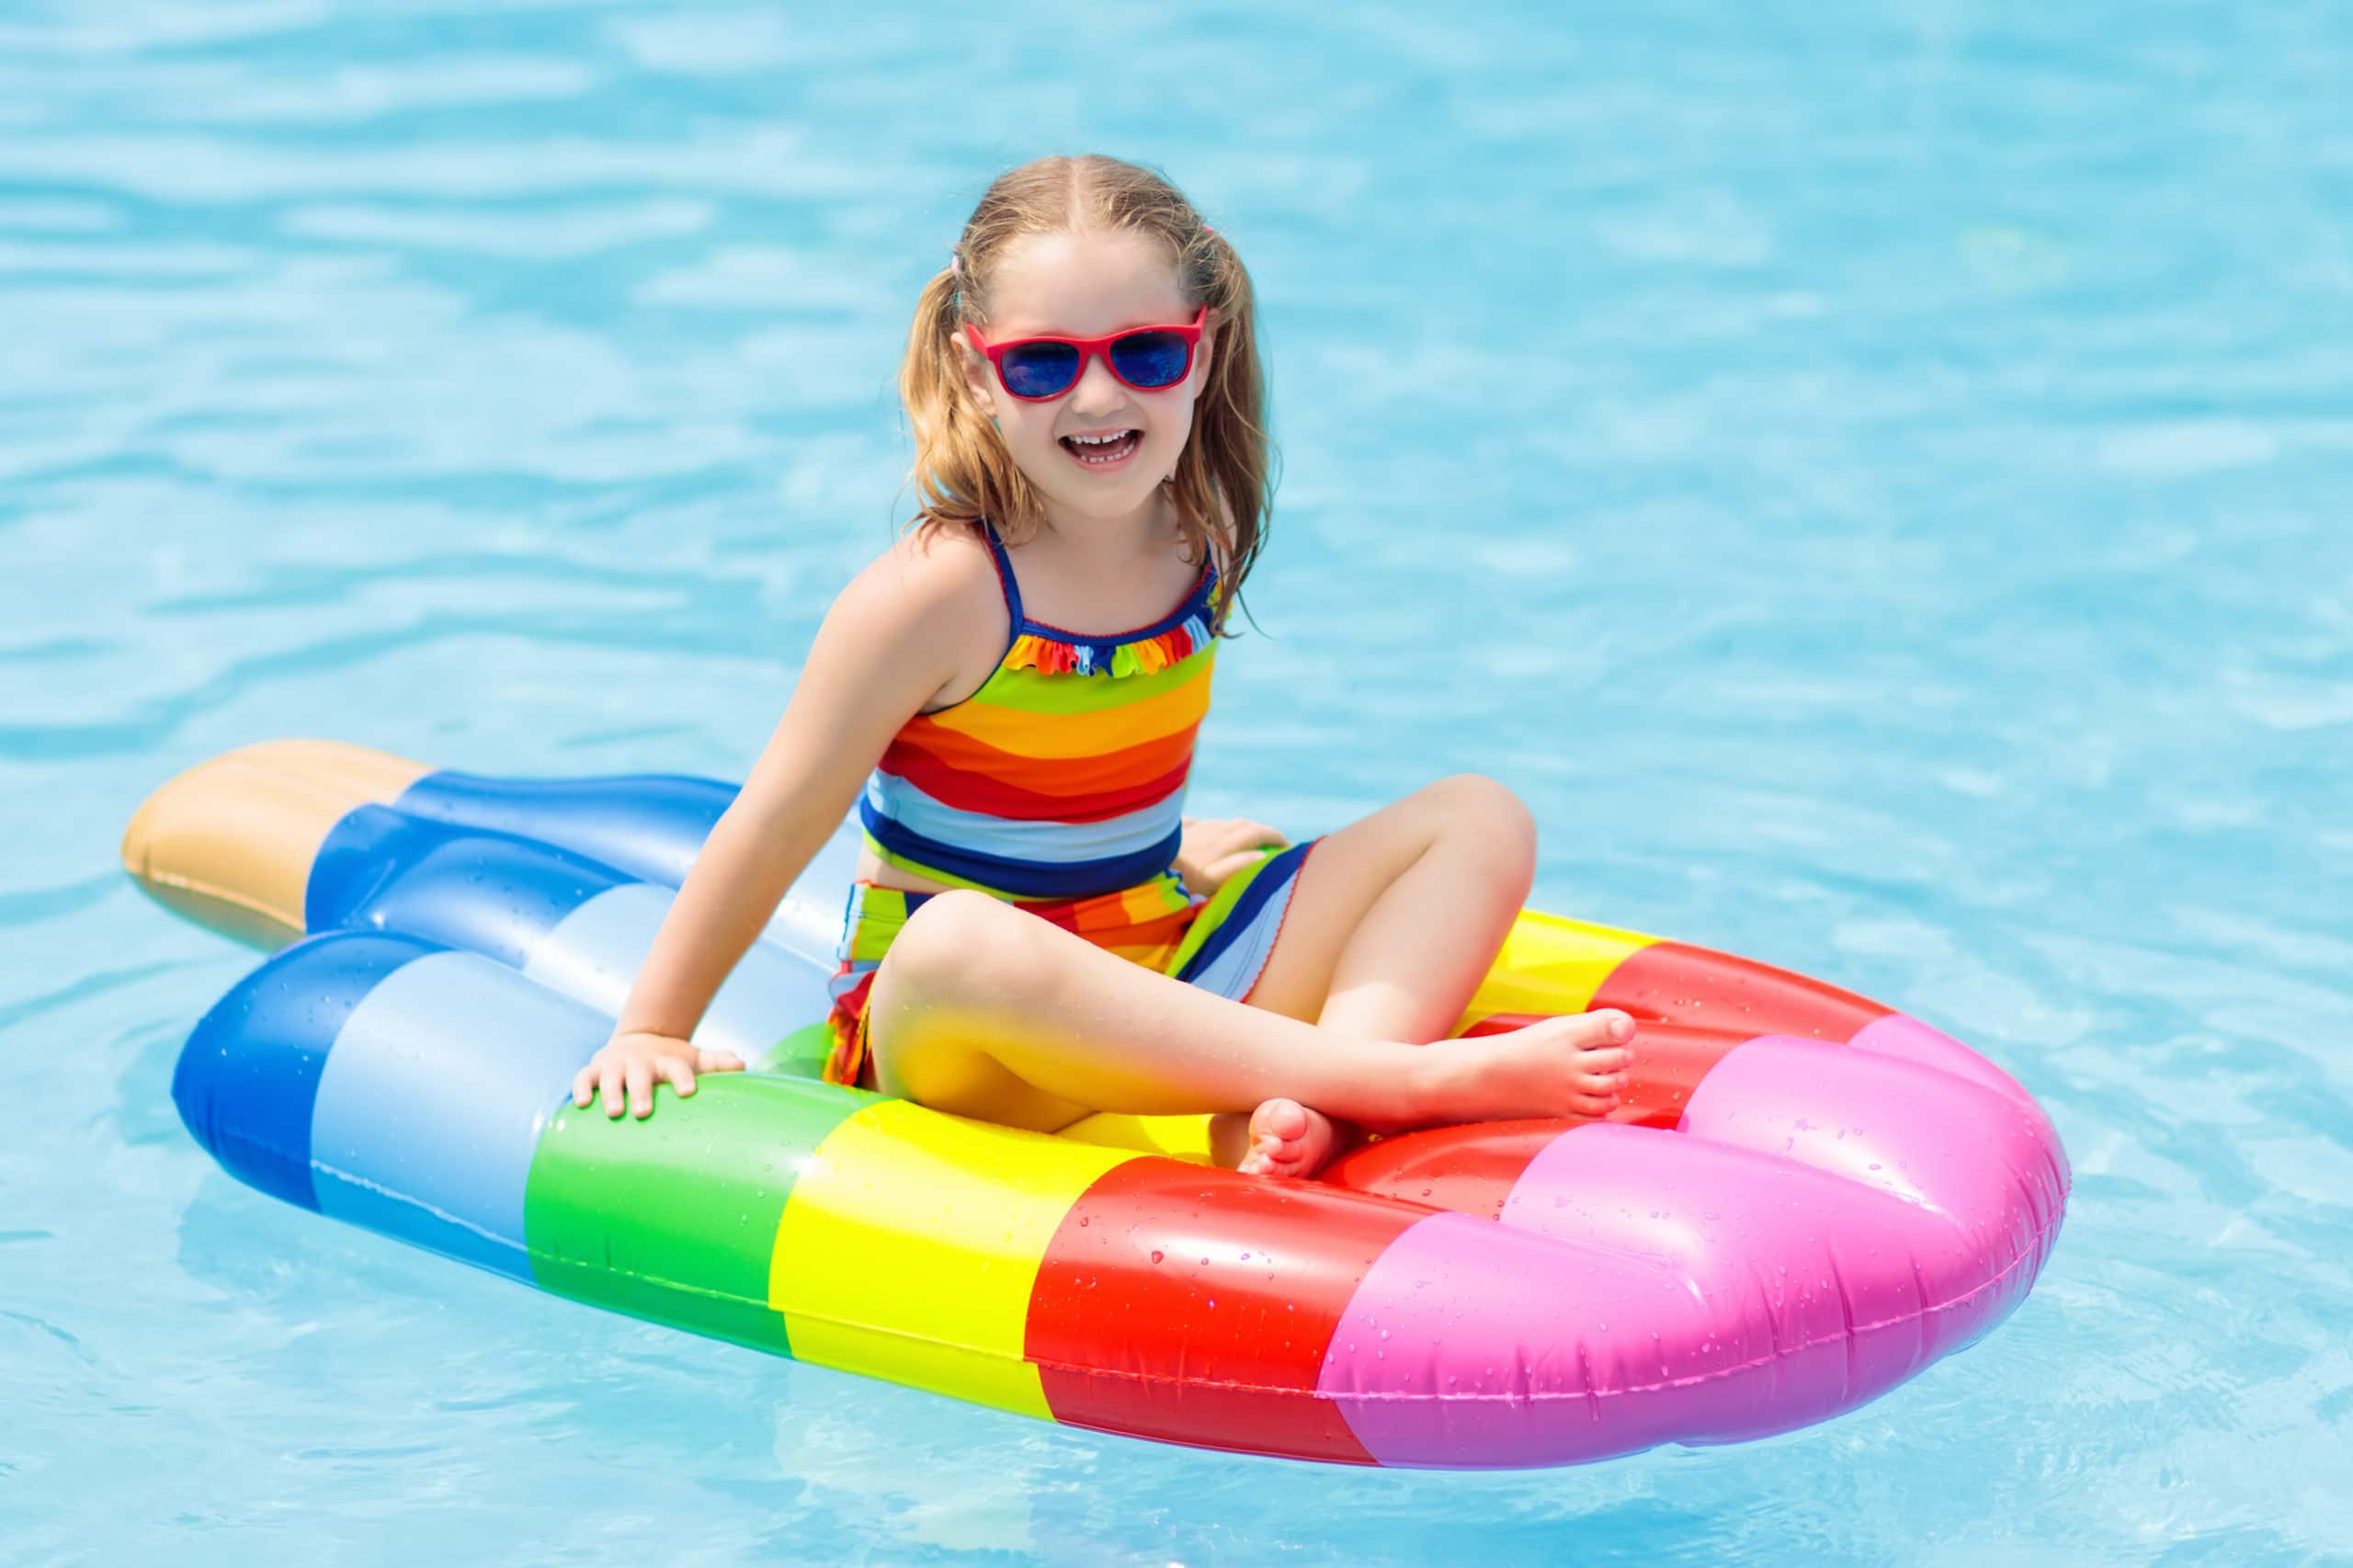 Are Pool Floats Dangerous? - BABY BARRIER® Pool Fence